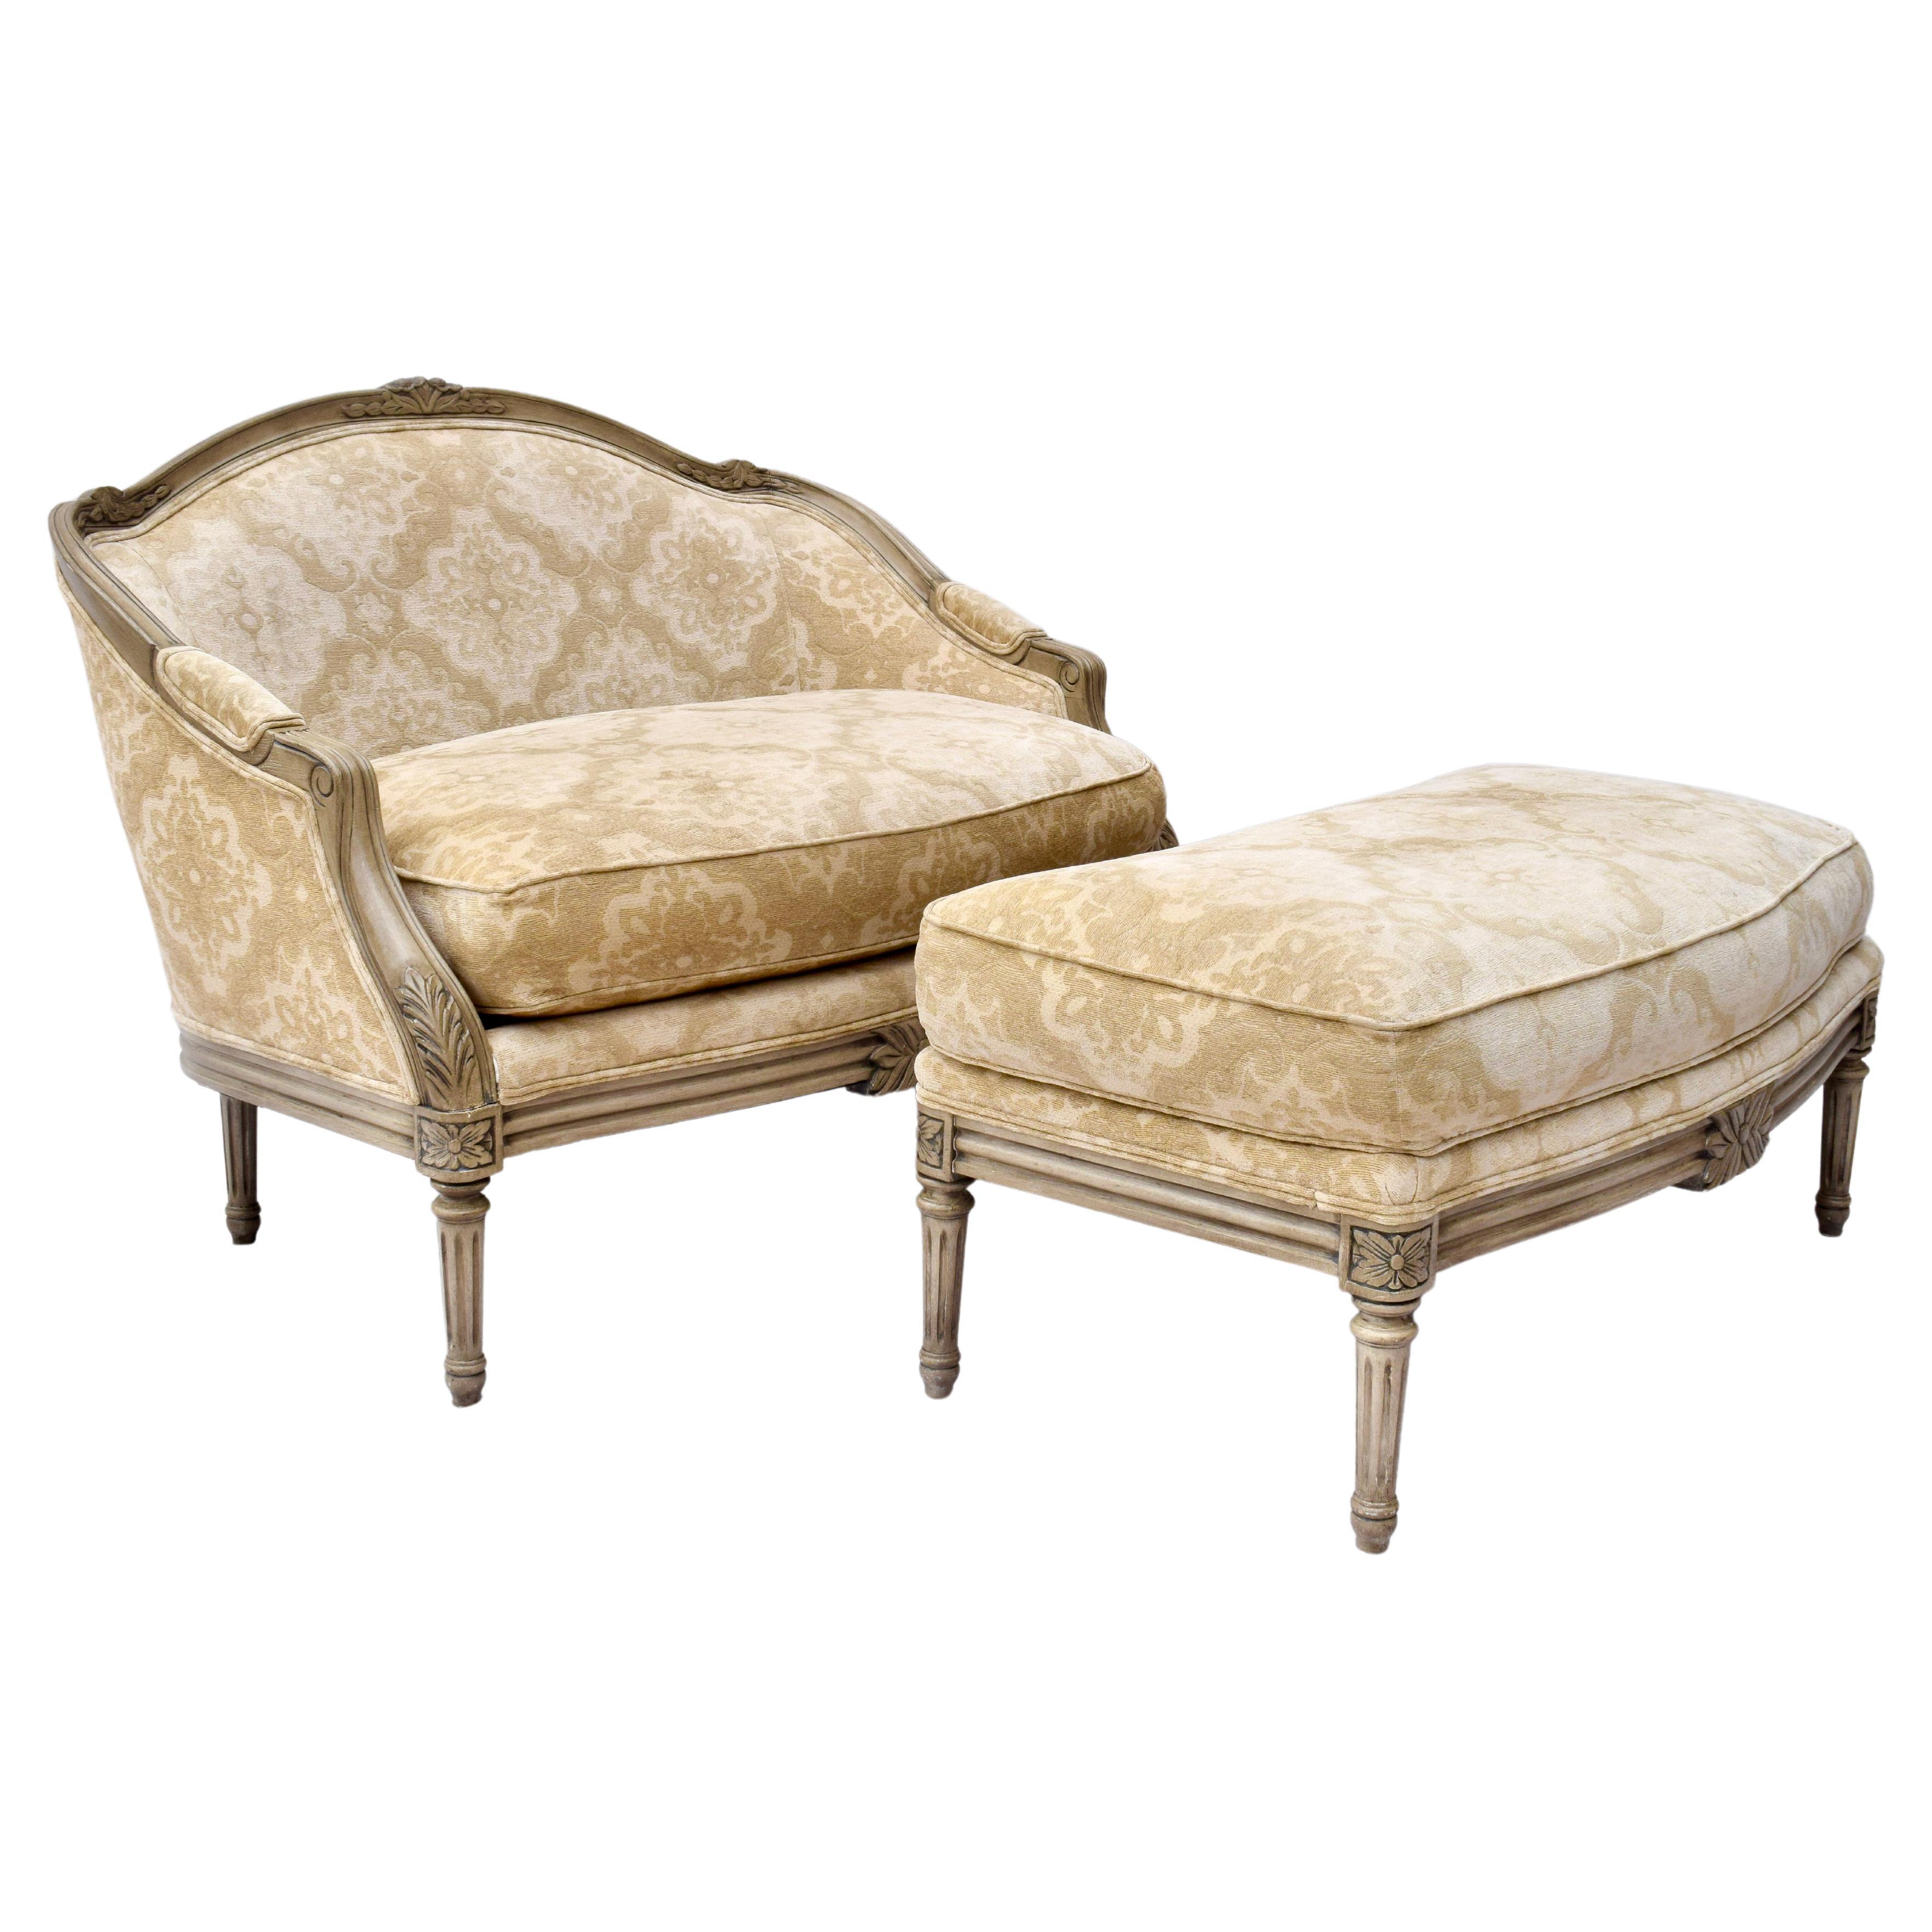 French Louis XvI Style Marquise Chair & Ottoman For Sale